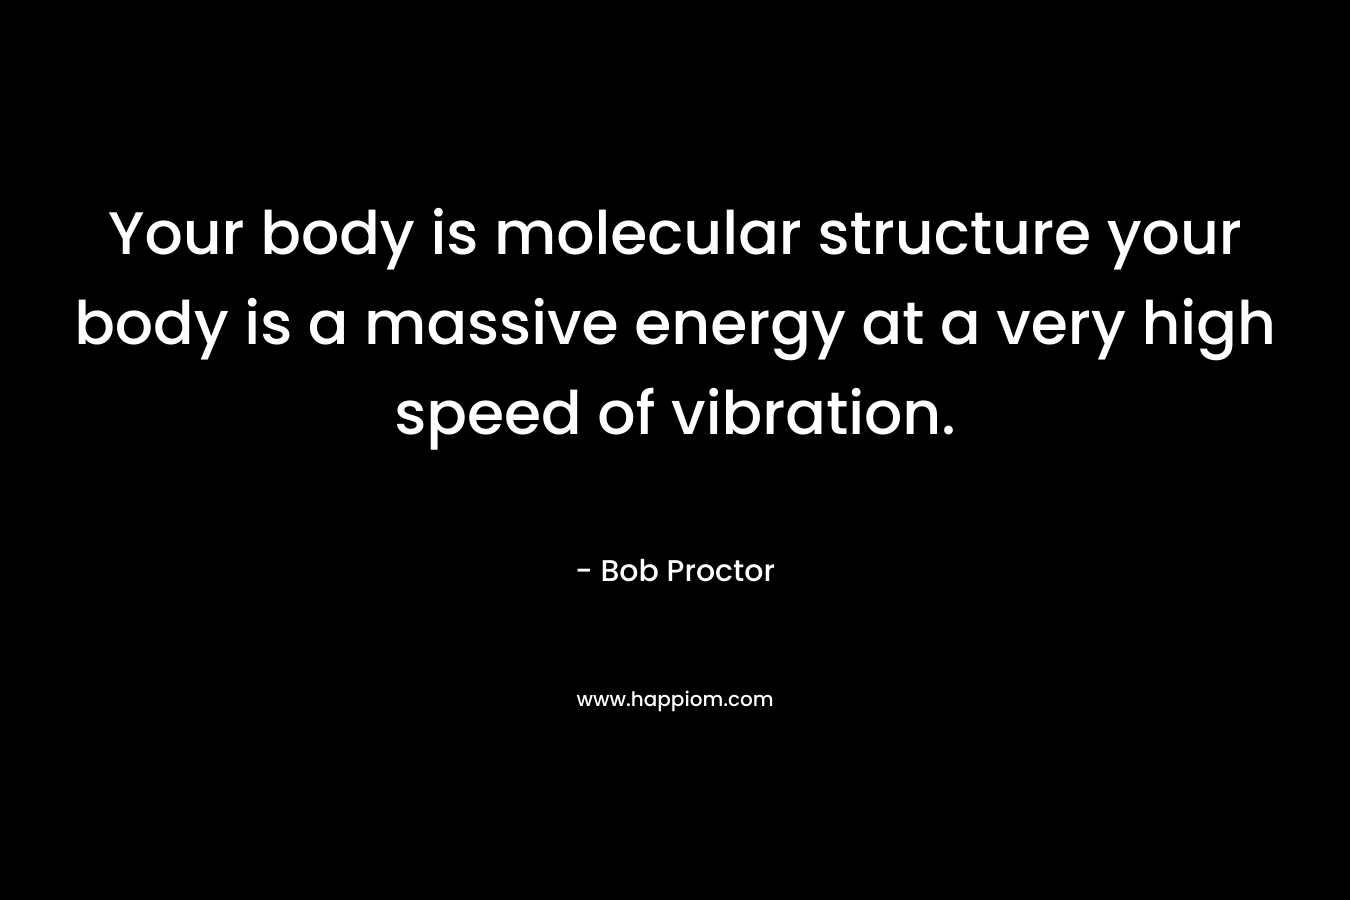 Your body is molecular structure your body is a massive energy at a very high speed of vibration. – Bob Proctor